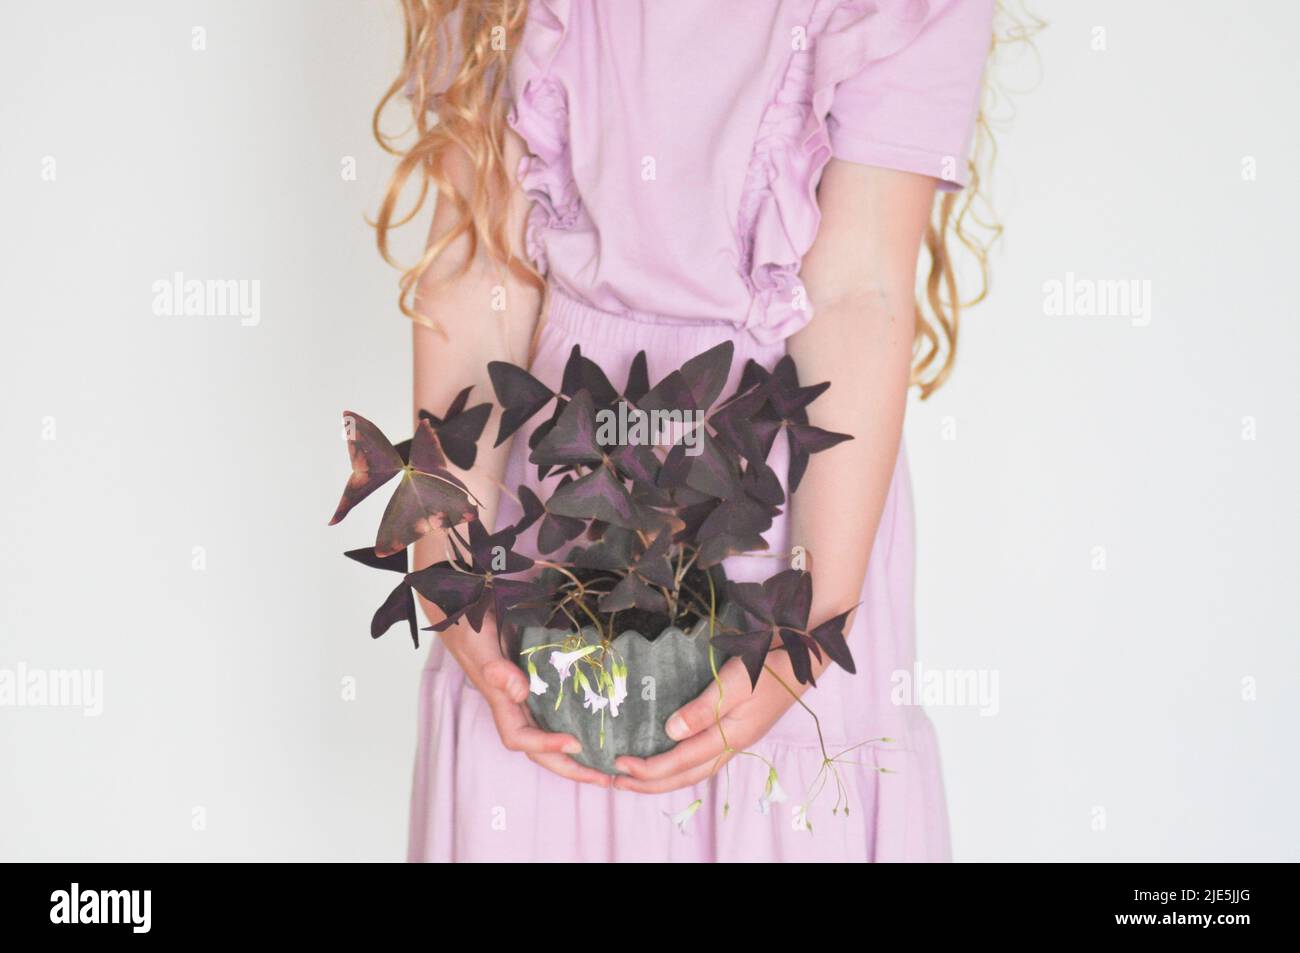 A studio shot of a young girl in purple dress holding an Oxalis triangularis pot plant set against a white background. Stock Photo